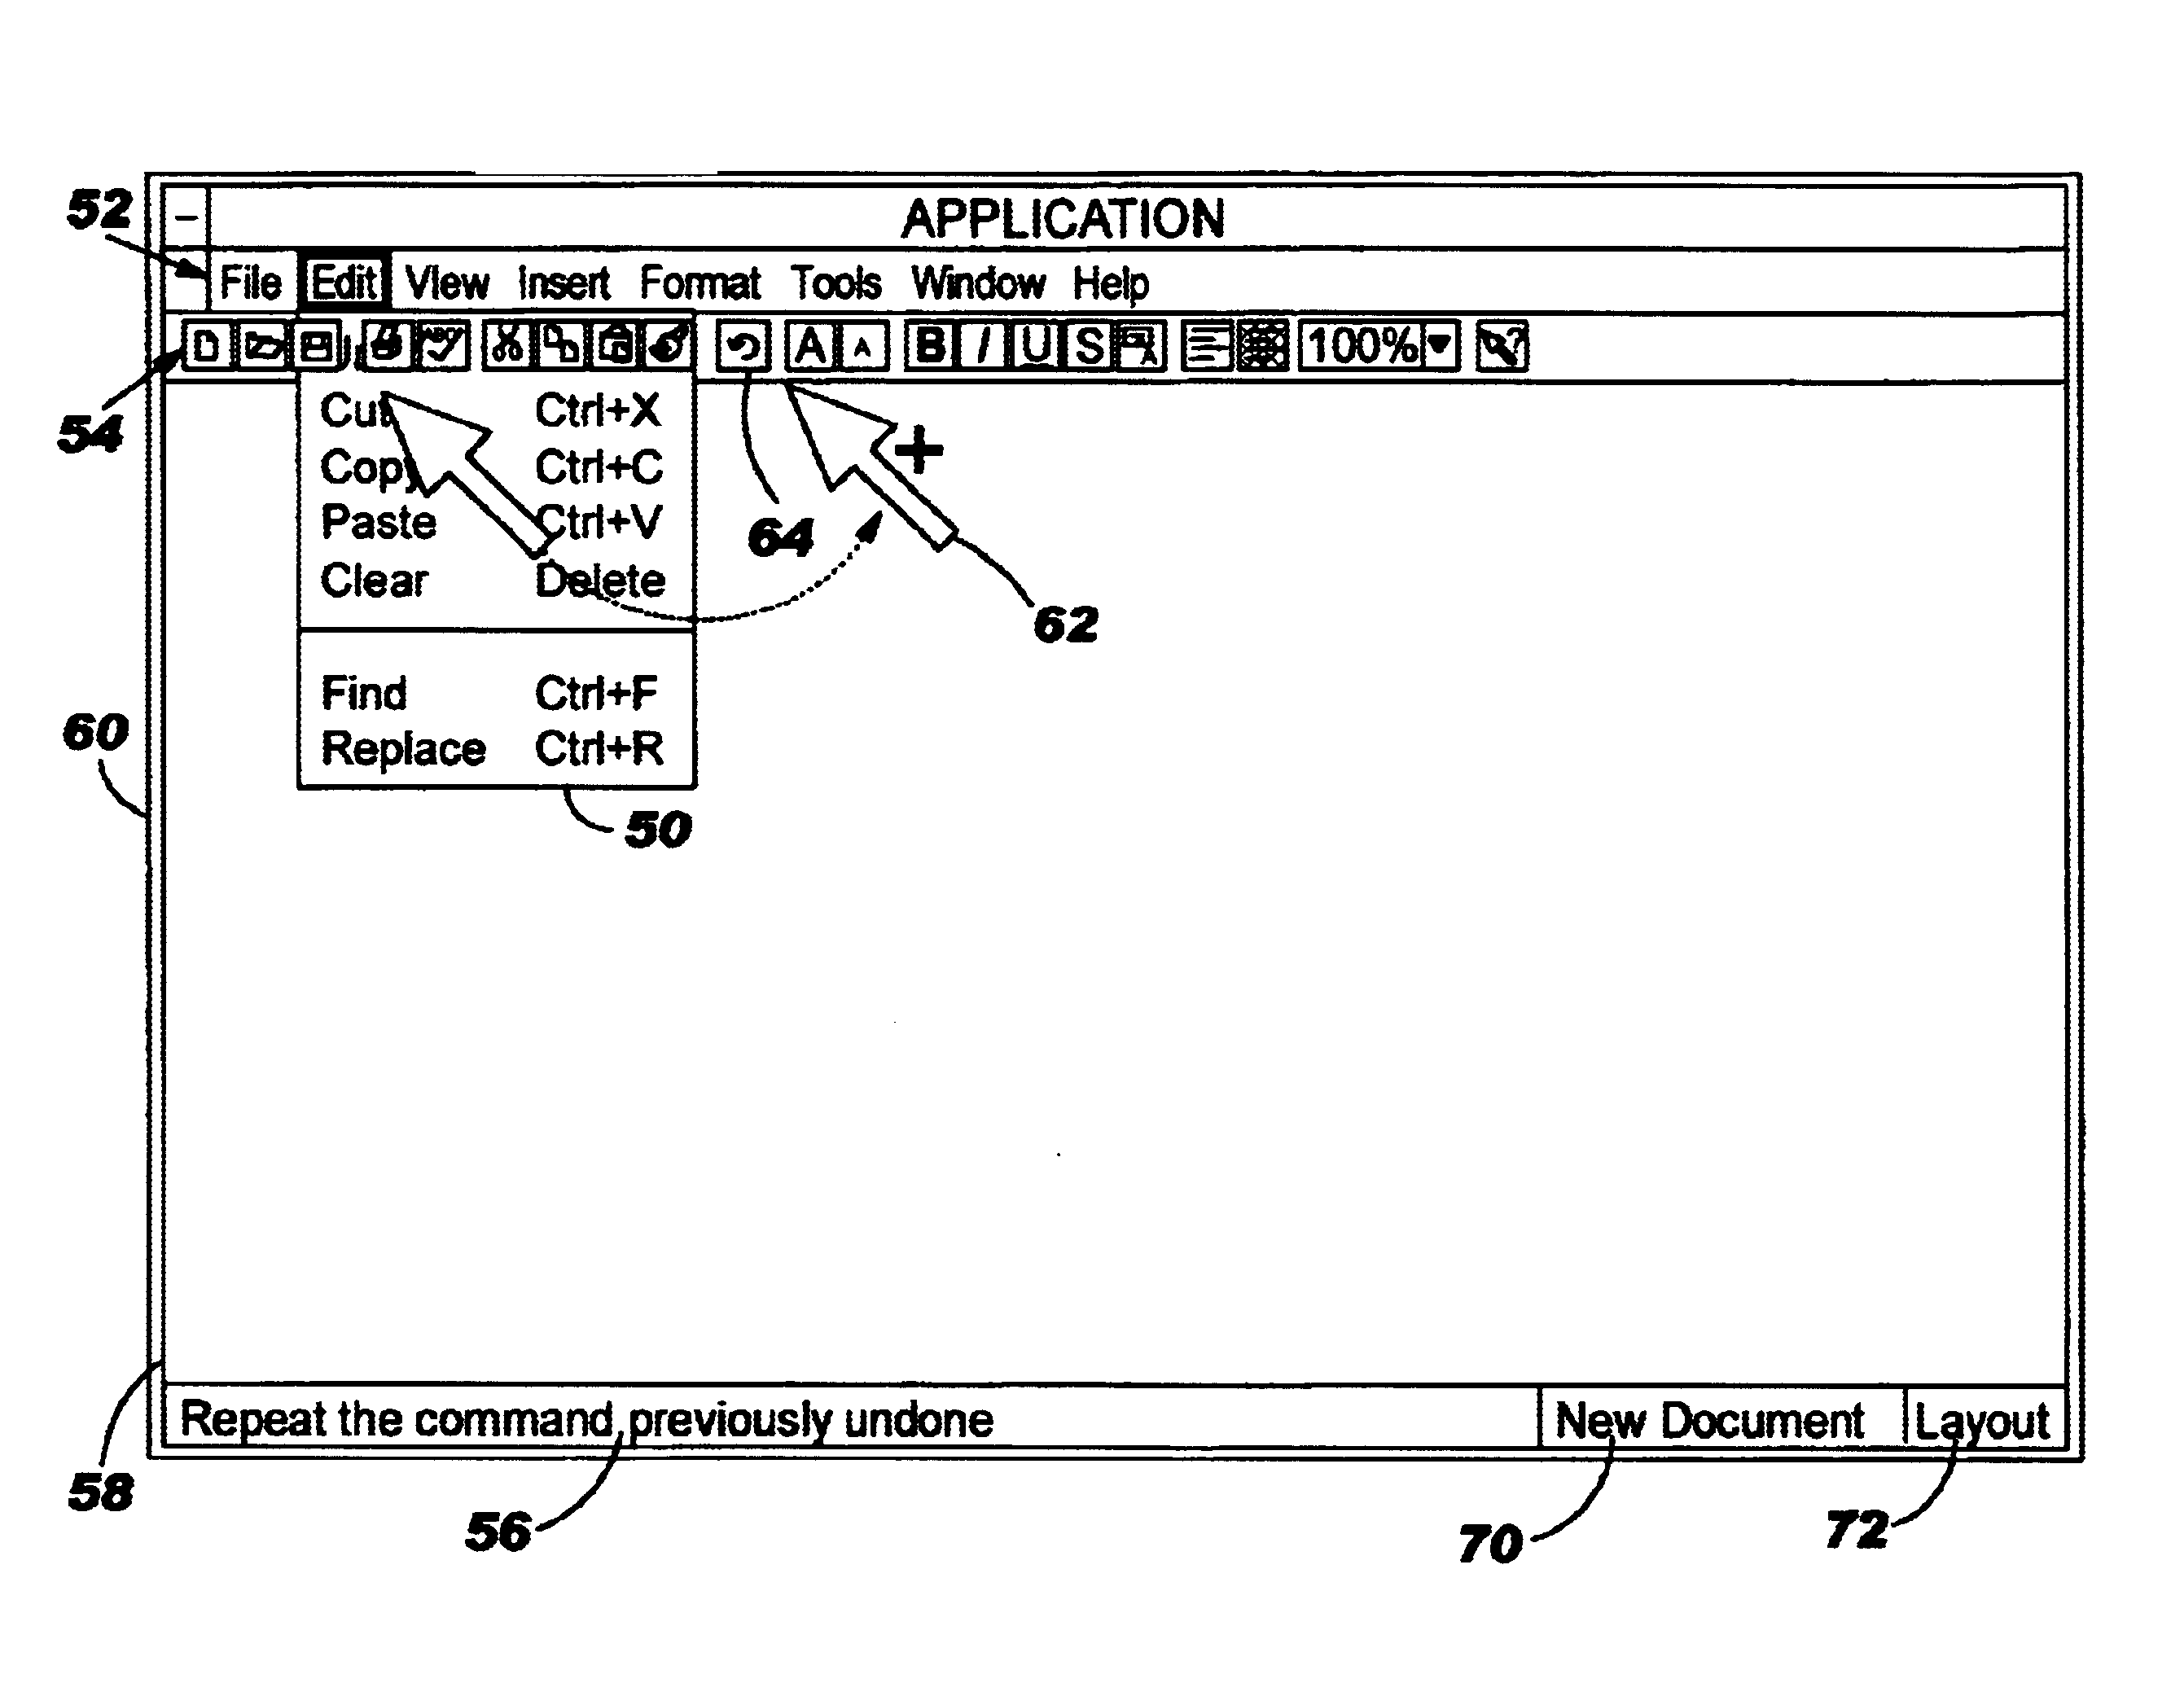 Flexible mouse-driven method of user interface